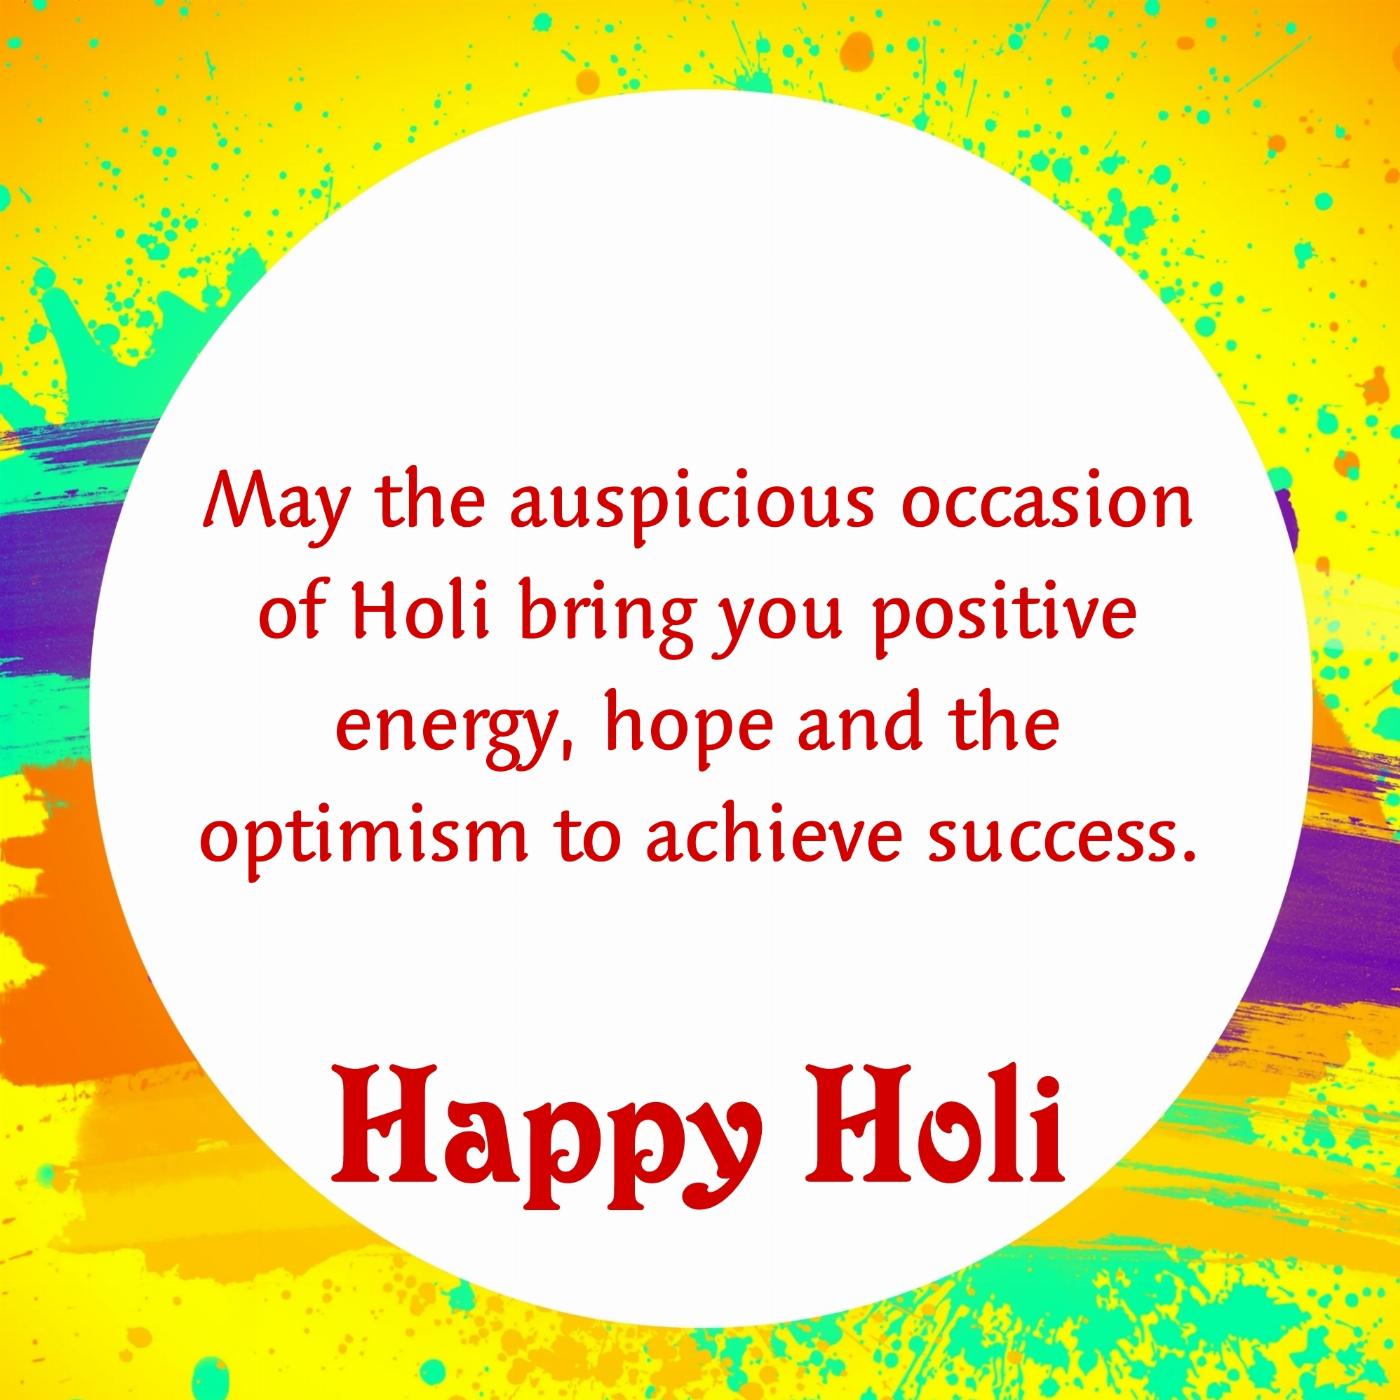 May the auspicious occasion of Holi bring you positive energy